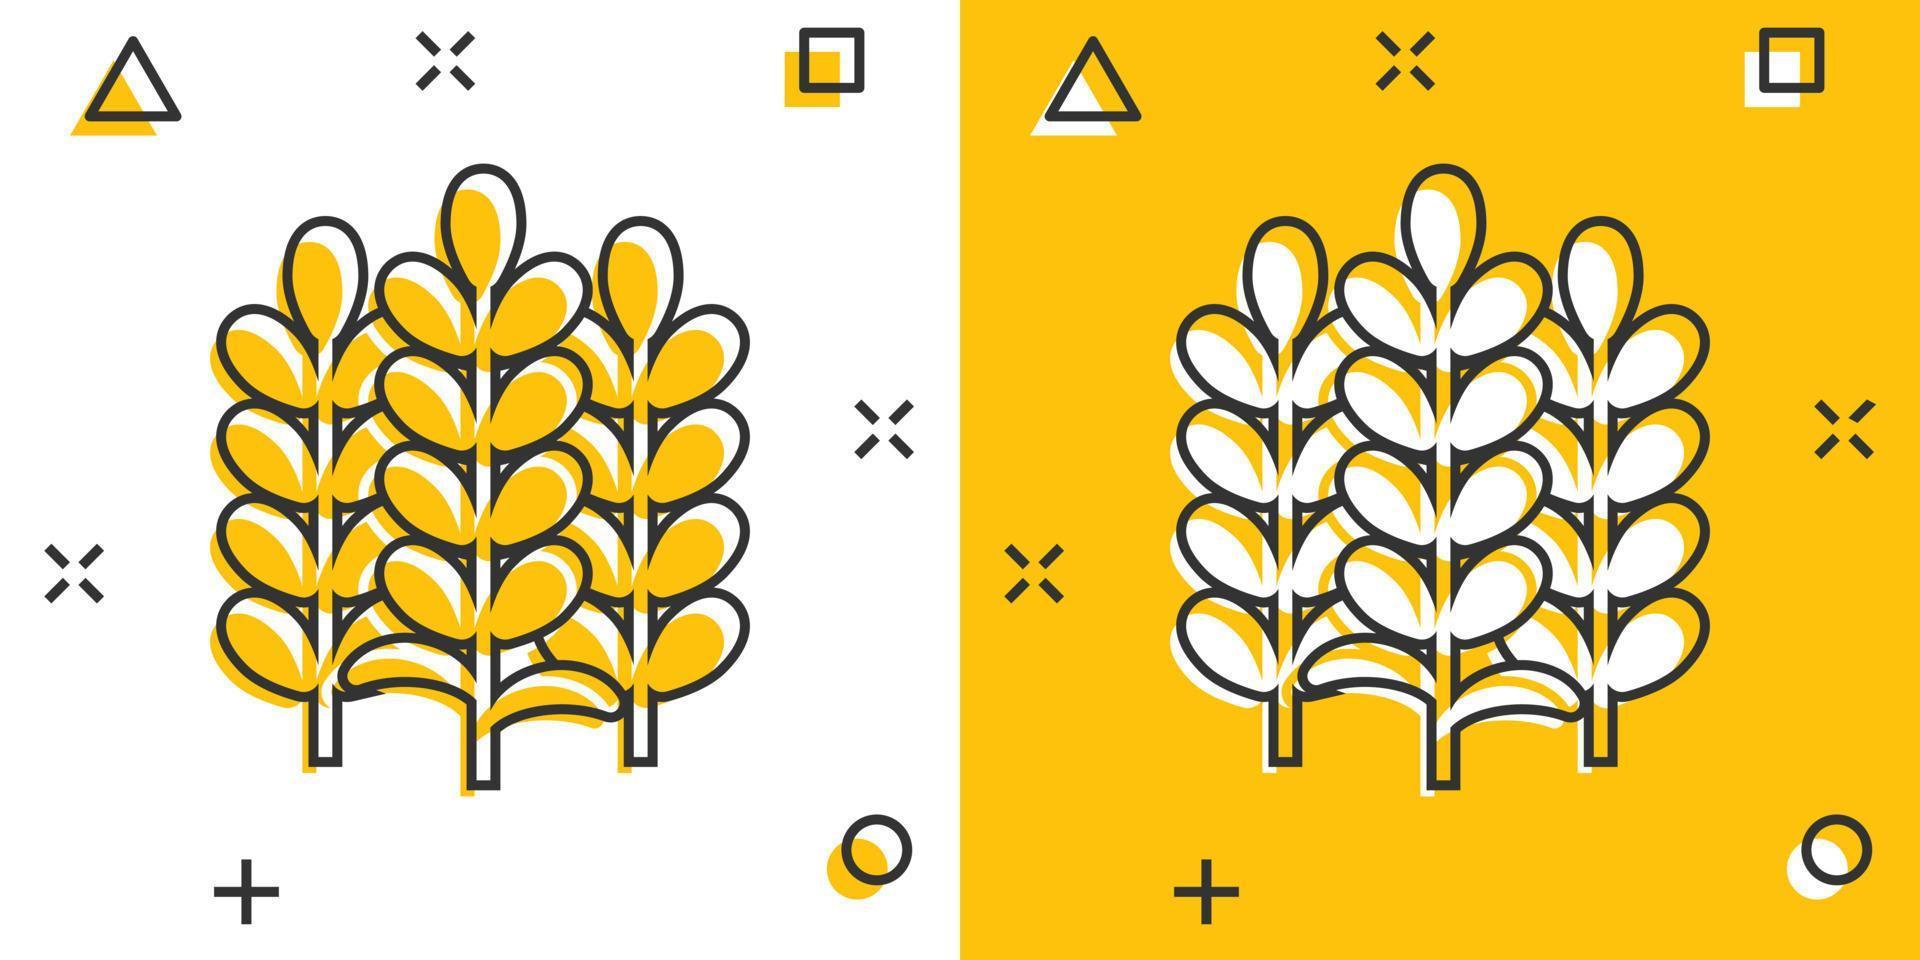 Wheat icon in comic style. Barley cartoon vector illustration on white isolated background. Harvest stem splash effect business concept.